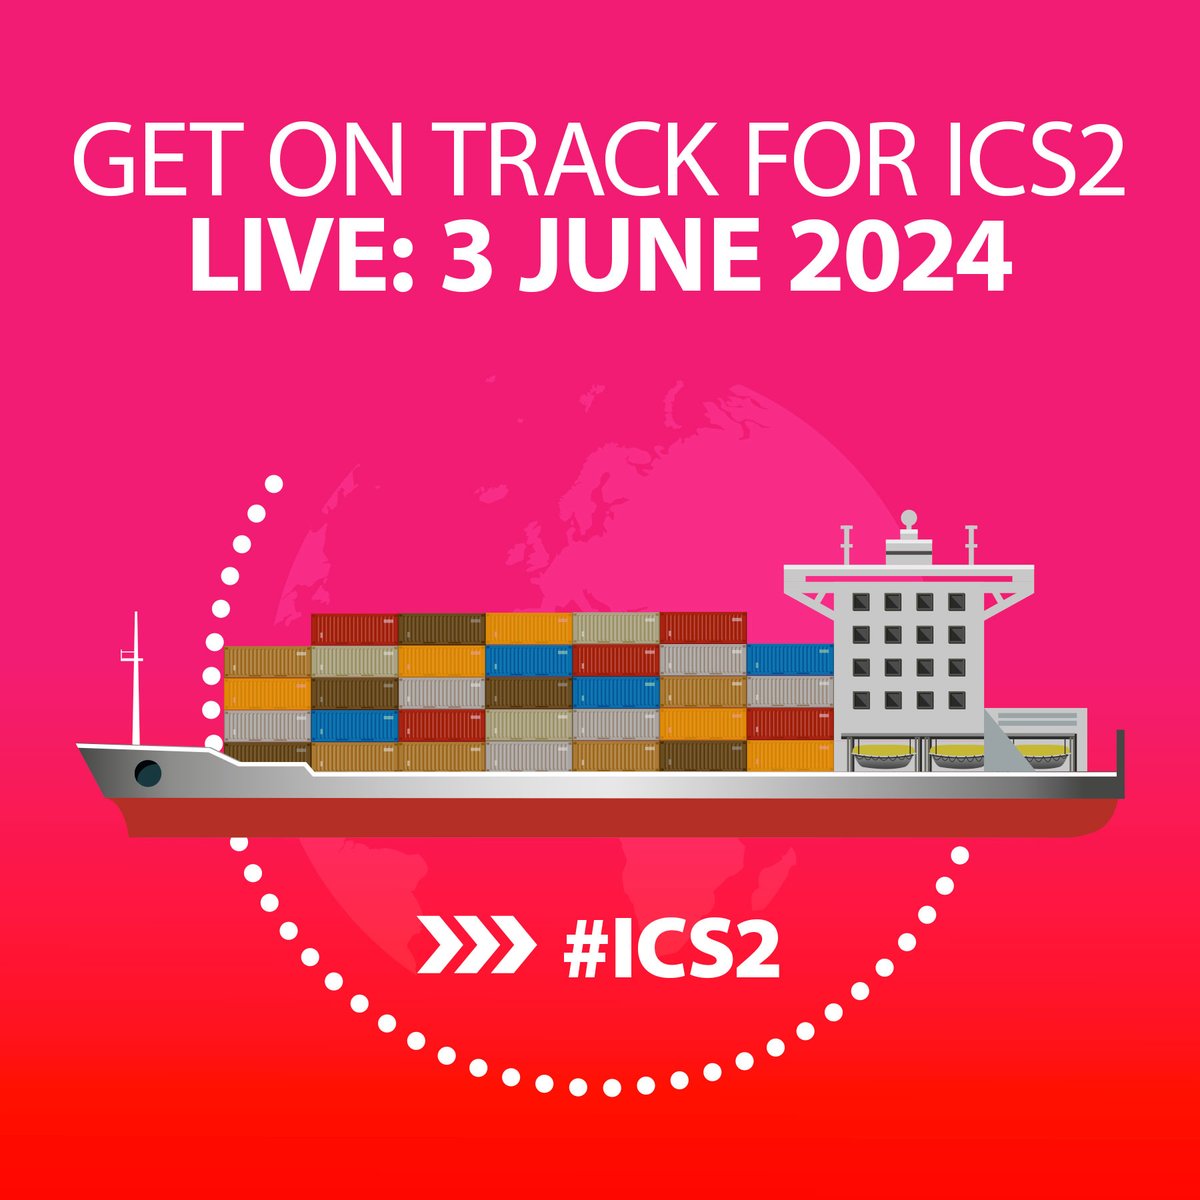 📢Traders using maritime & inland waterways, take note, #ICS2 goes🔴live on 3 June 2024, transforming EU goods entry. 🚢 Be aware of the new ICS2 requirements and take the necessary steps to comply with them. 🔗 Visit 👉 europa.eu/!TgMmrK